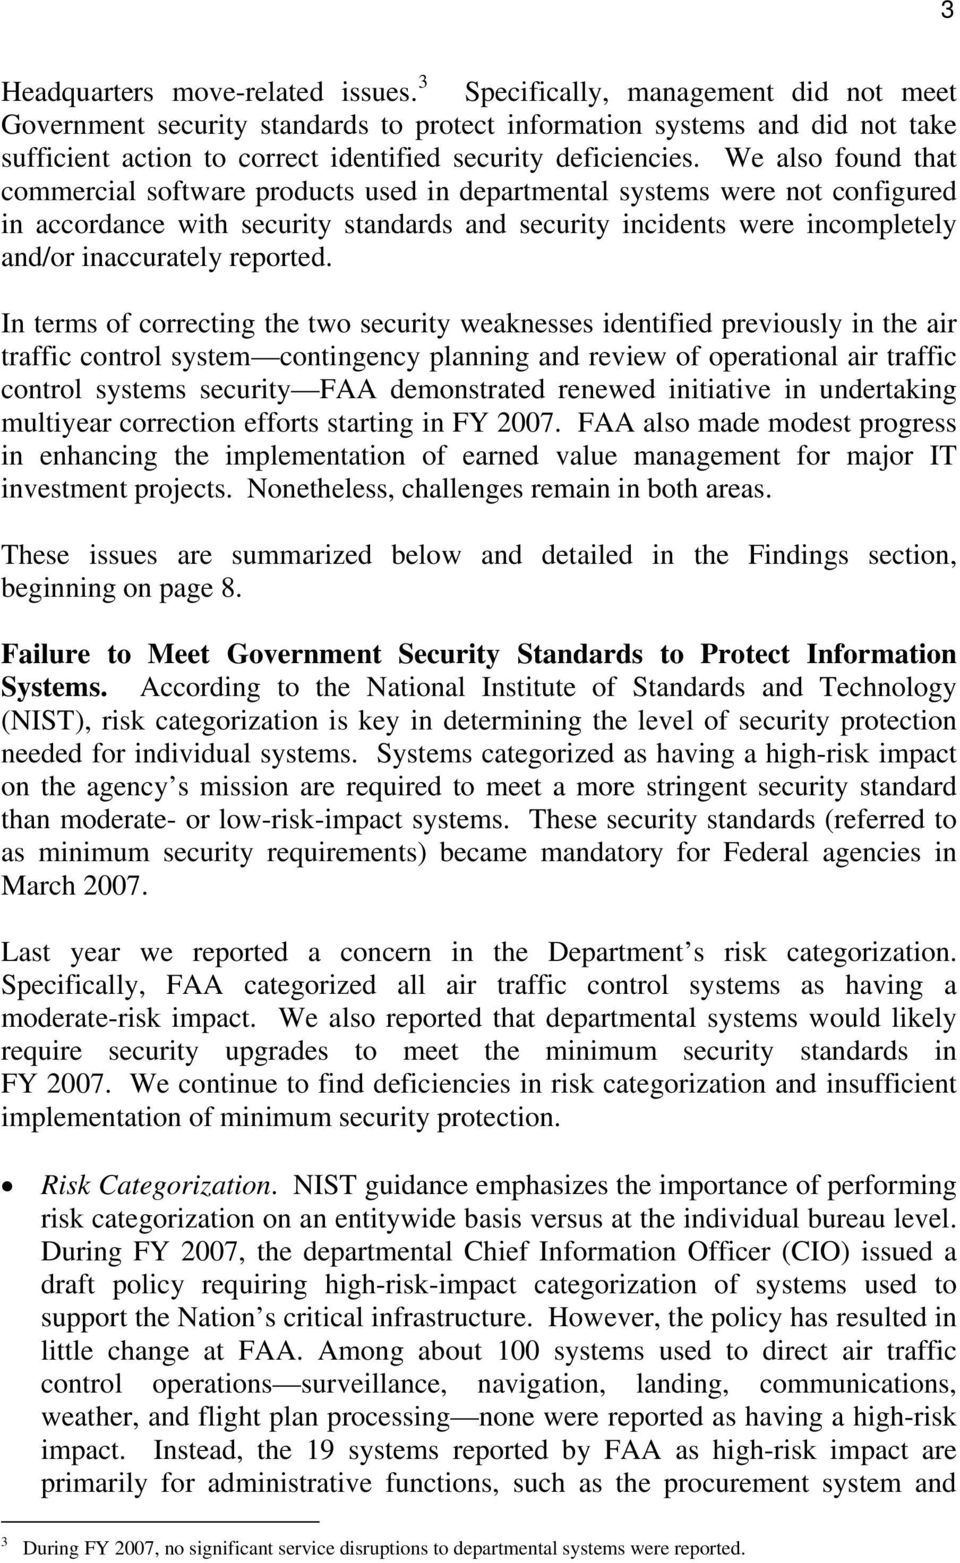 We also found that commercial software products used in departmental systems were not configured in accordance with security standards and security incidents were incompletely and/or inaccurately